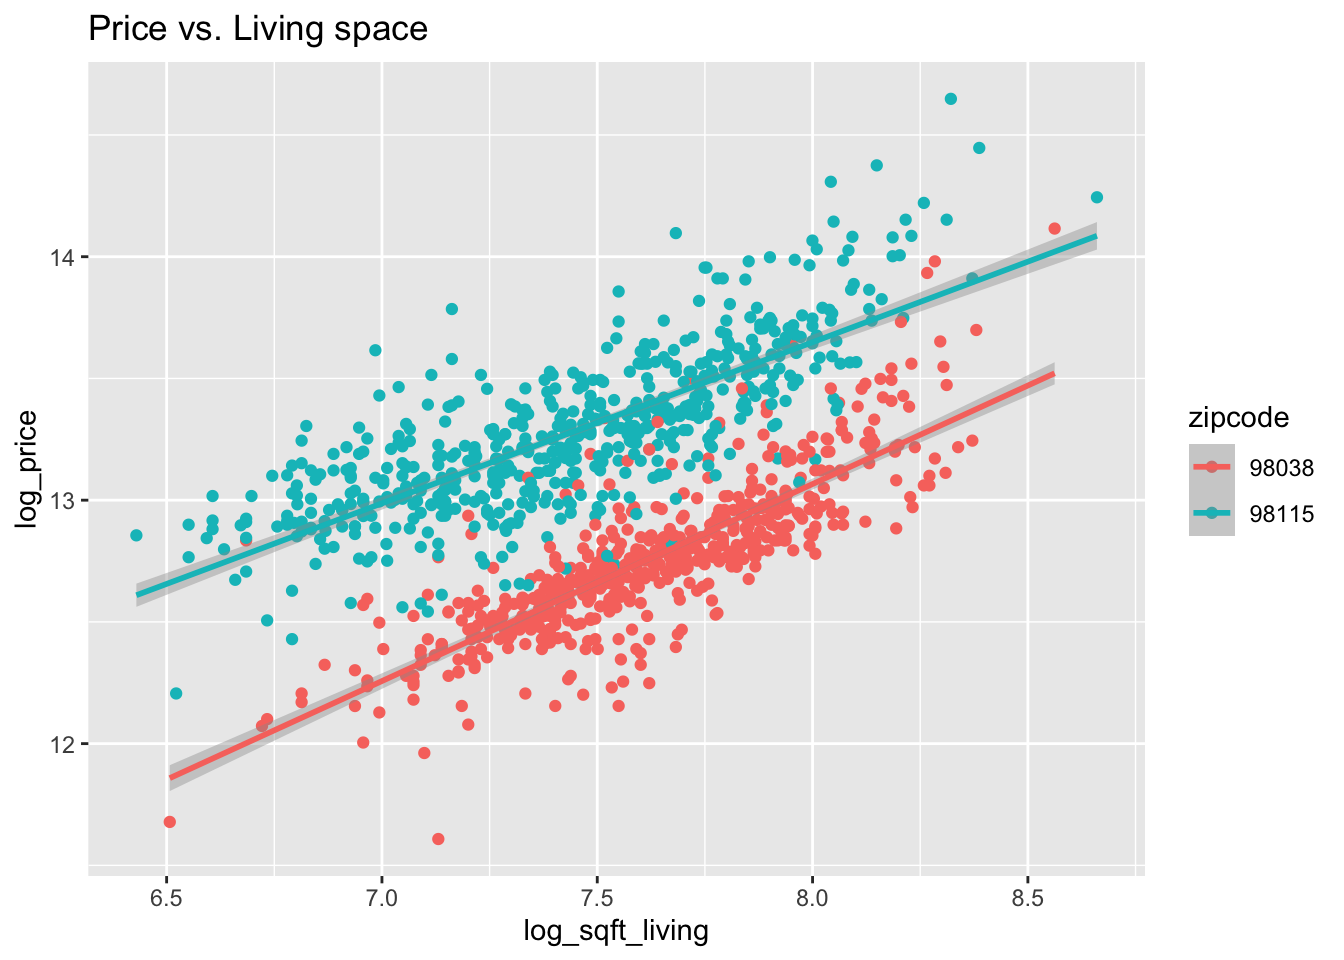 House price as a function of living space and lot size in two Seattle area ZIP codes (all variables logged).